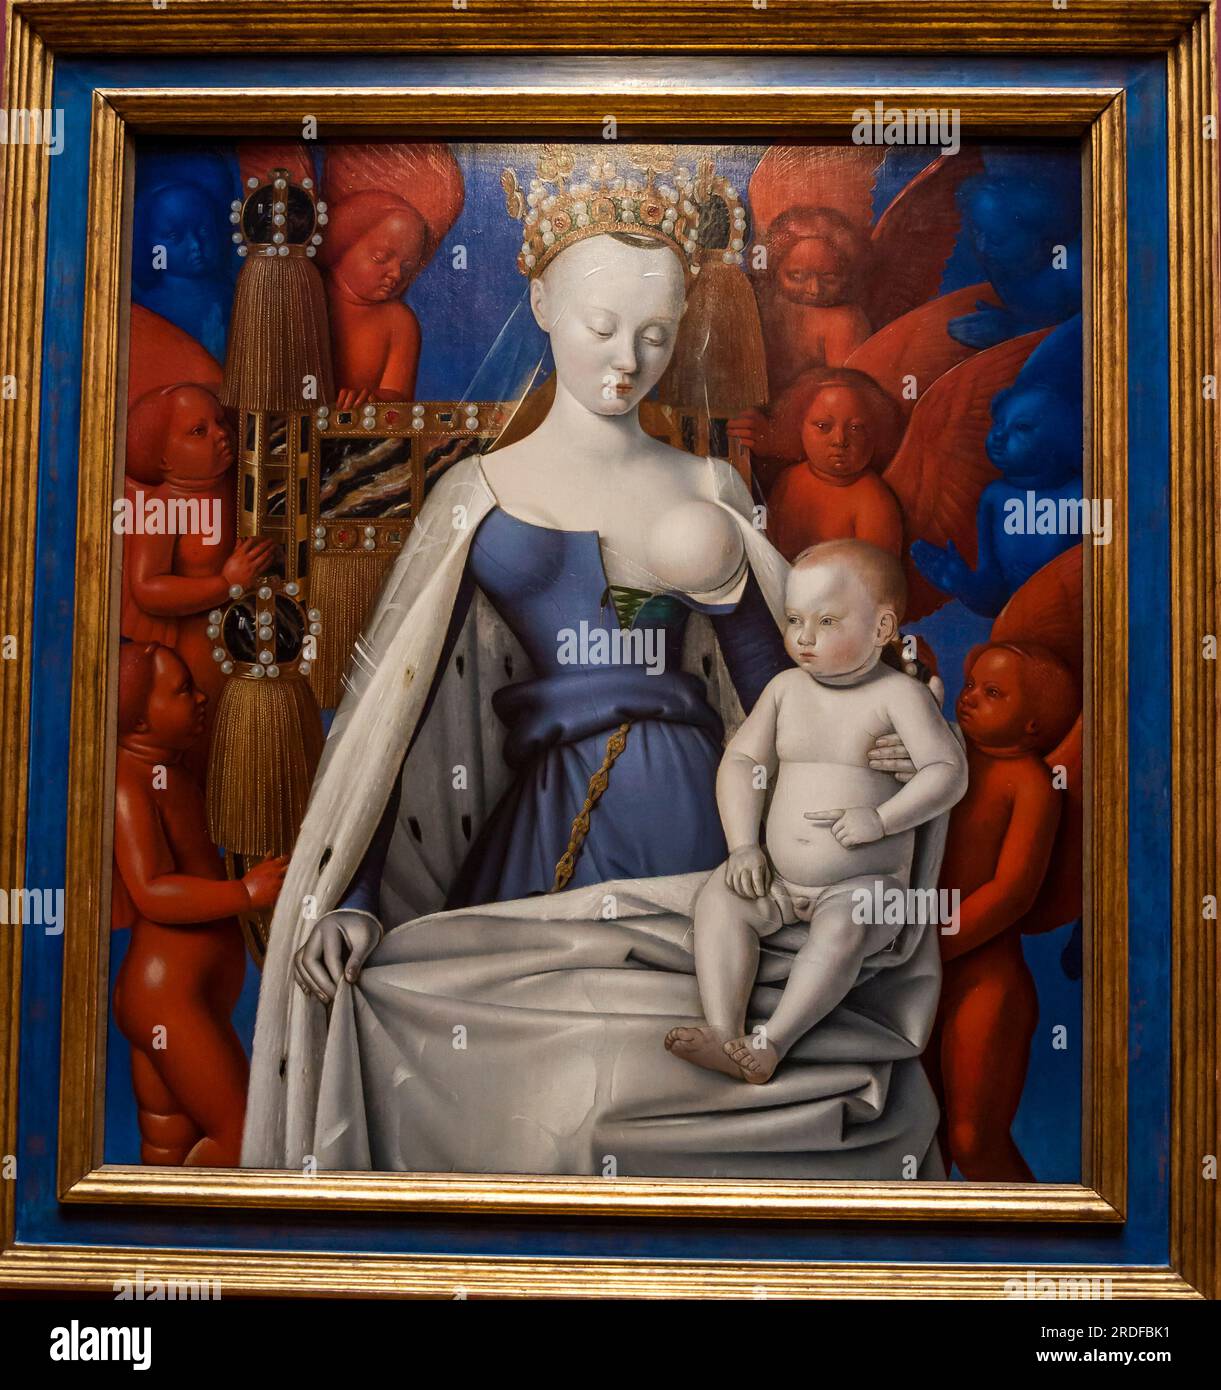 Virgin and Child Surrounded by Angels by Jean Fouquet. c. 1454, Old Masters museum, Royal Museum of Fine Arts, Antwerp, Belgium Stock Photo